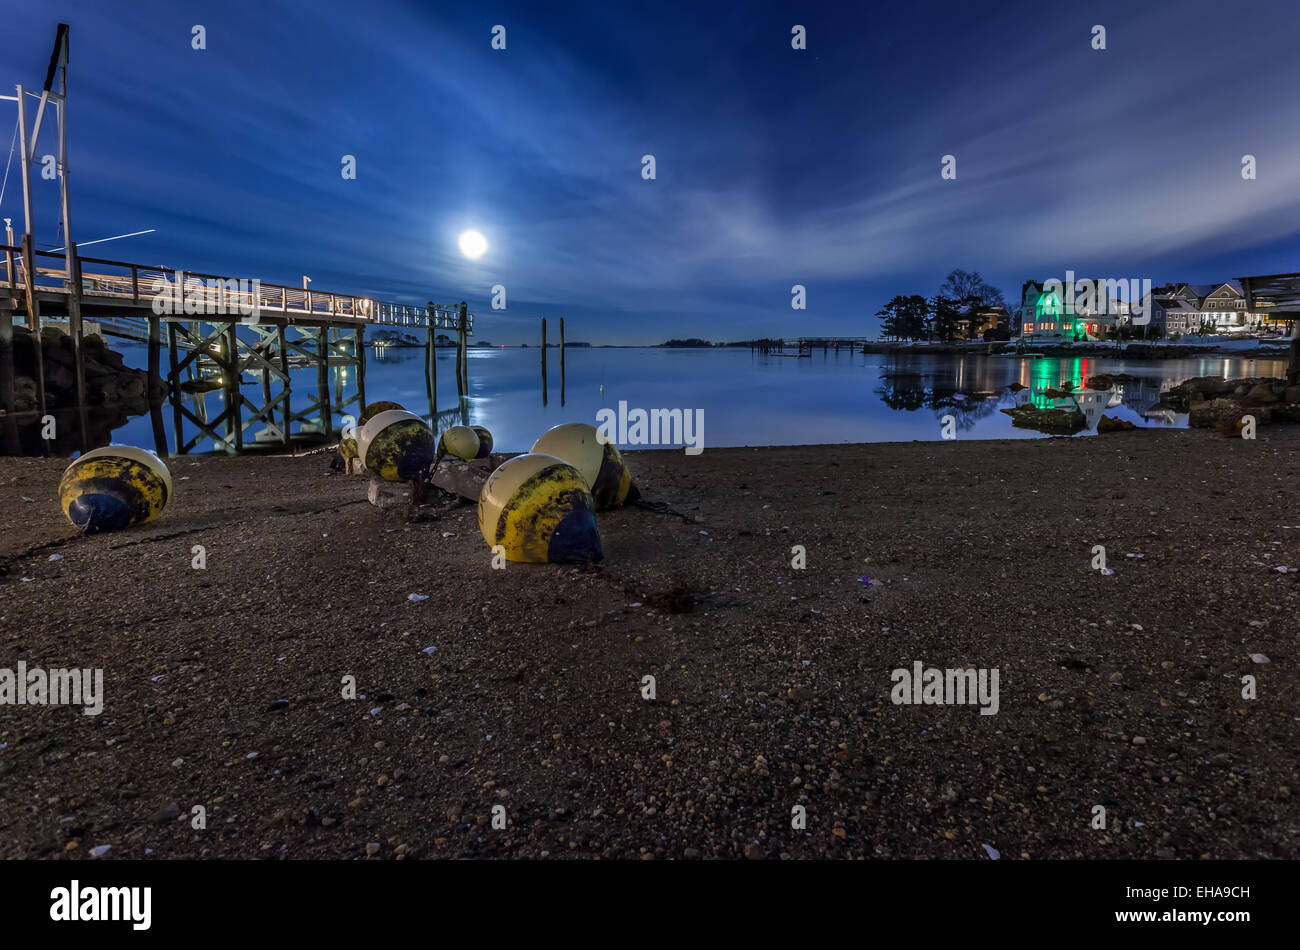 Buoys and floats on the shore by a deck under a blue moonlit sky at night. Stock Photo